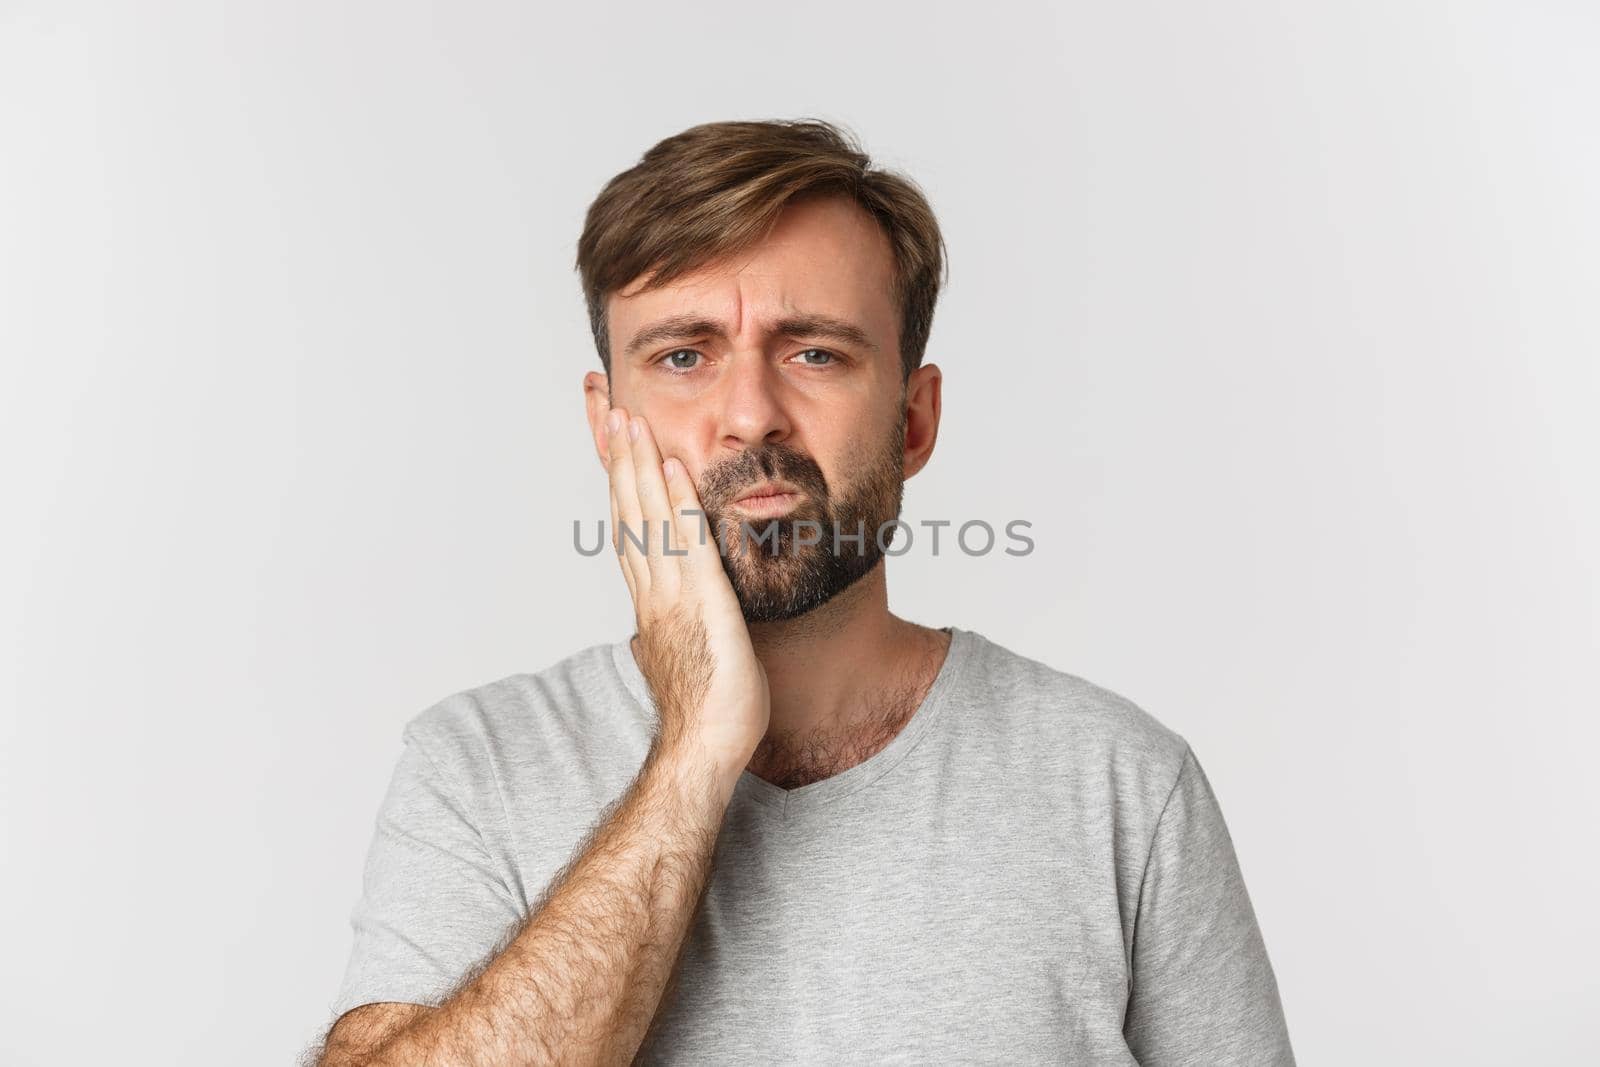 Close-up of gloomy bearded man, touching cheek and complaining on toothache, need see dentist, standing over white background.